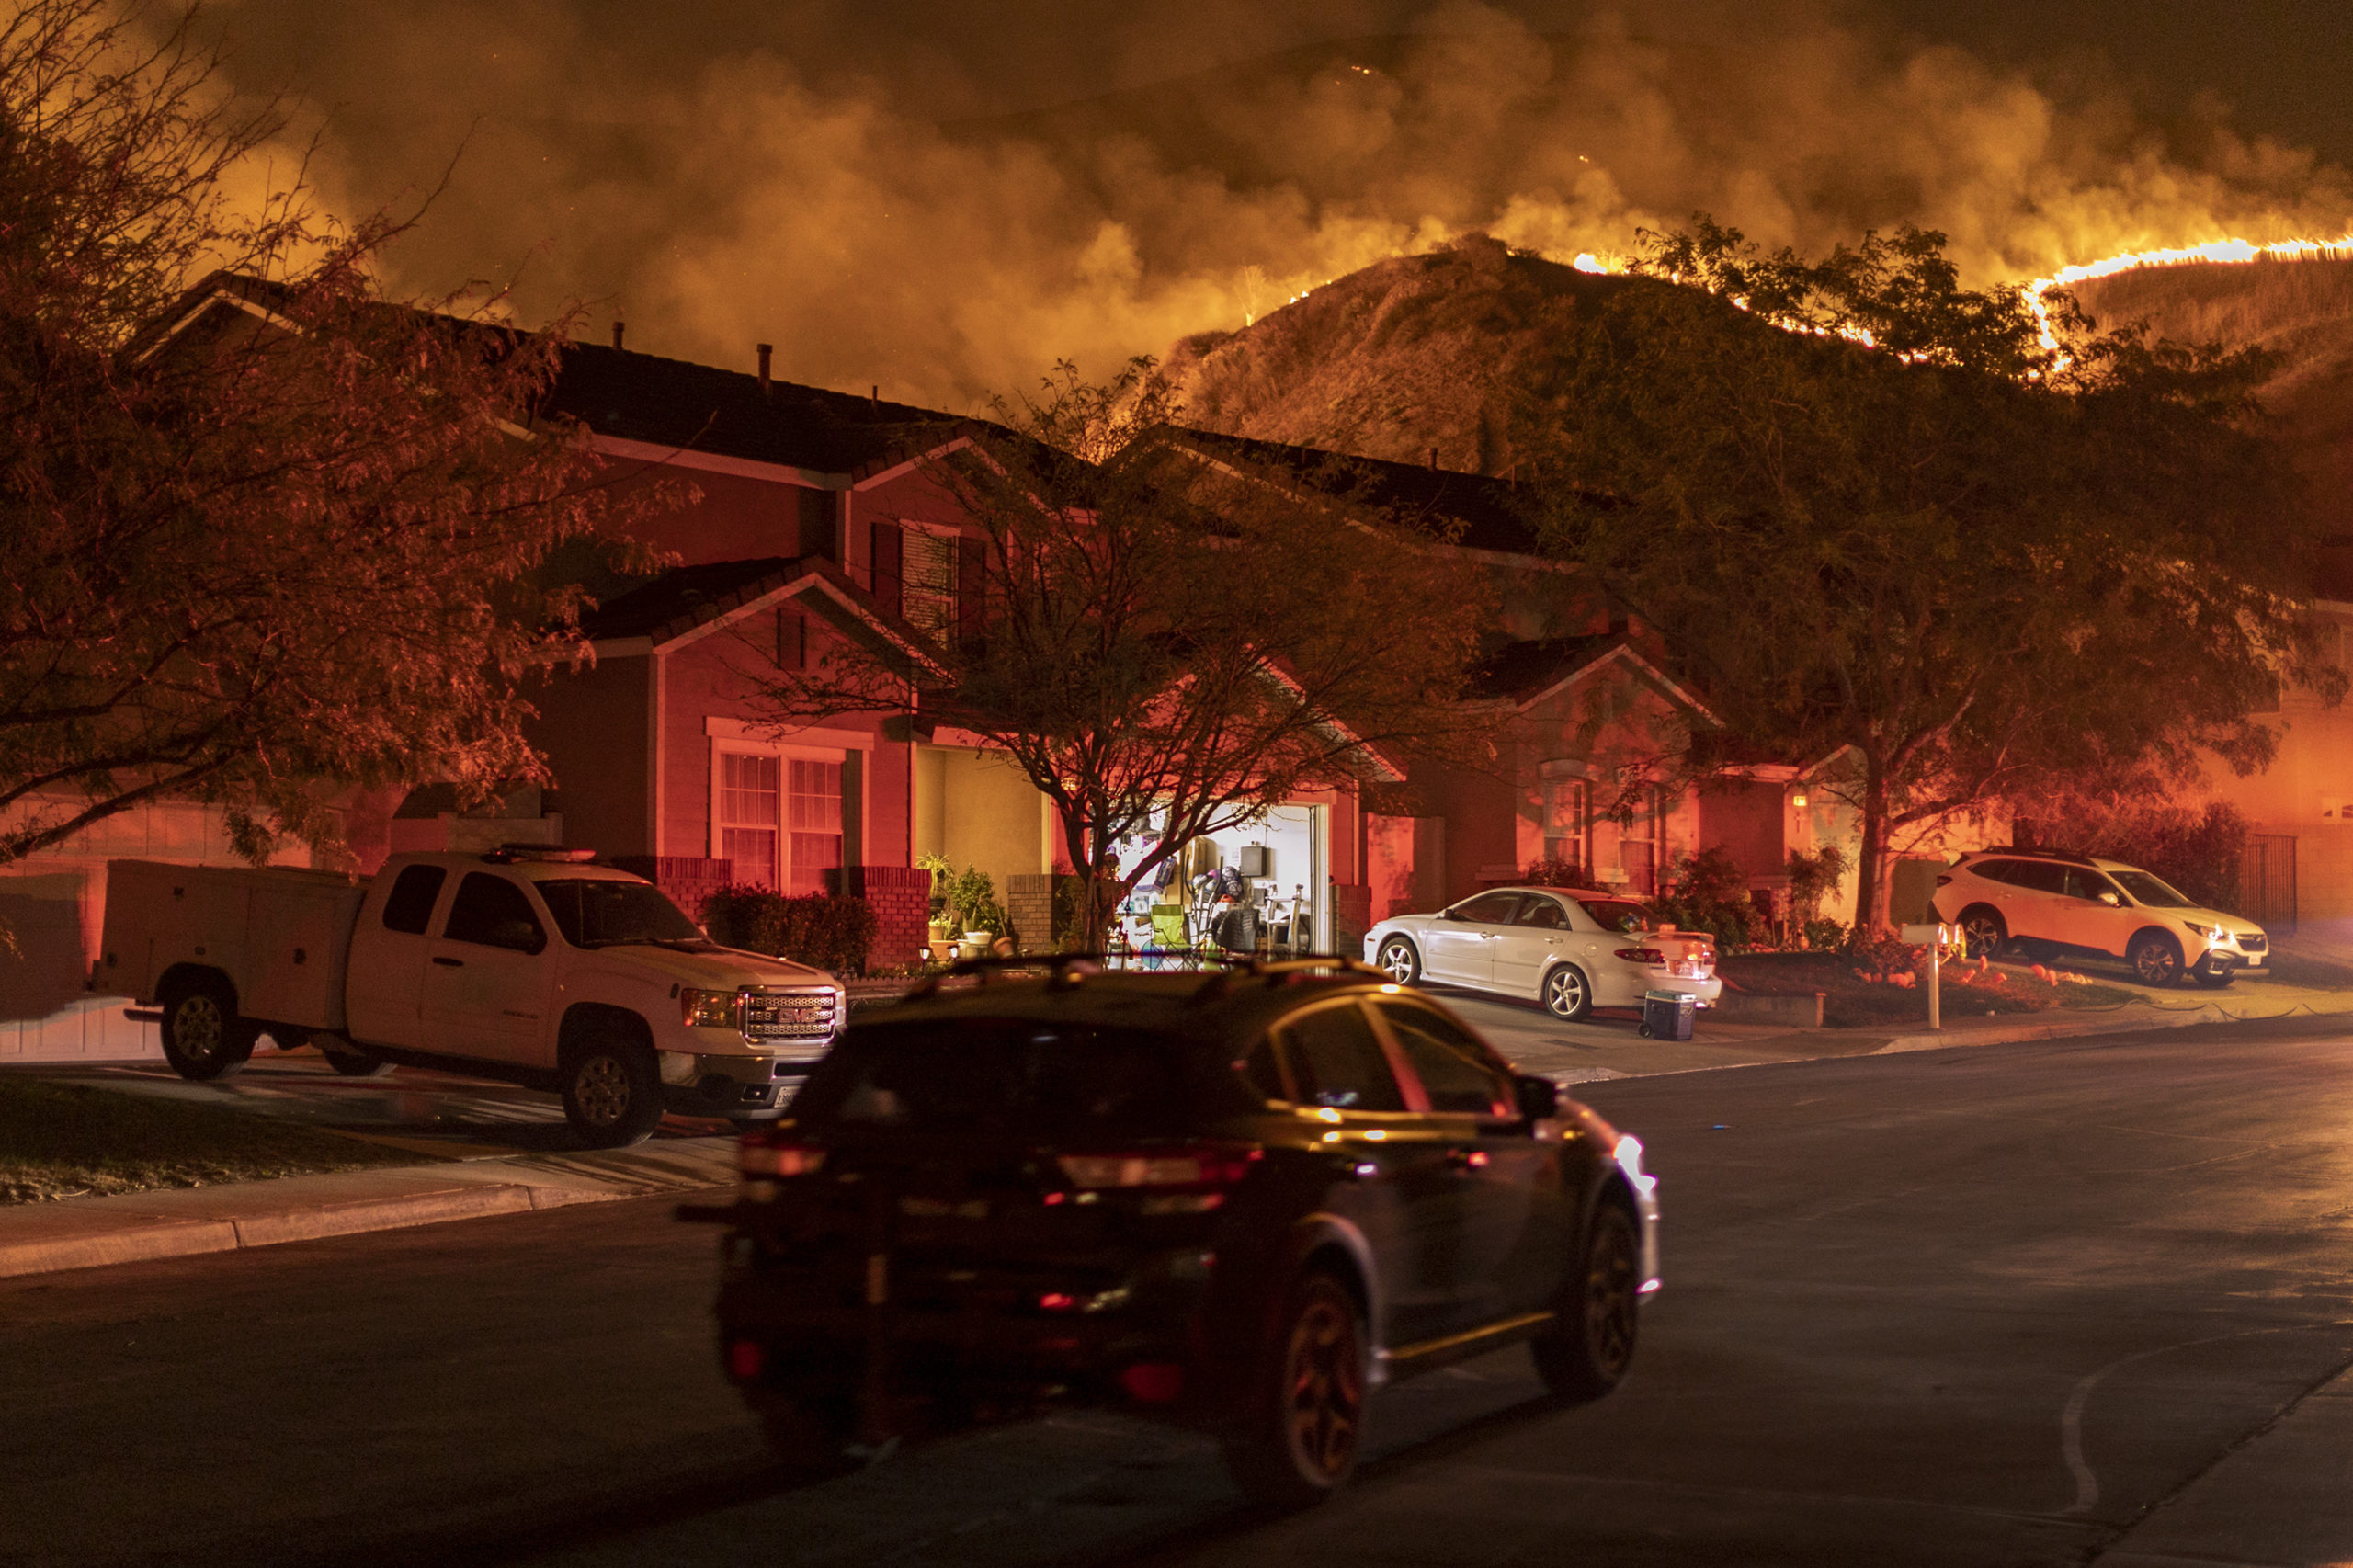 Flames come close to houses during the Blue Ridge Fire on Oct. 27, 2020 in Chino Hills, California. Strong Santa Ana Winds gusting to more than 145 km per hour have driven the Blue Ridge Fire and Silverado Fire across thousands of acres, grounding firefighting aircraft, forcing tens of thousands of people to flee and gravely injuring two firefighters. More than 8,200 wildfires have burned across a record 4 million-plus acres so far this year, more than double the previous record.  (Photo: David McNew, Getty Images)